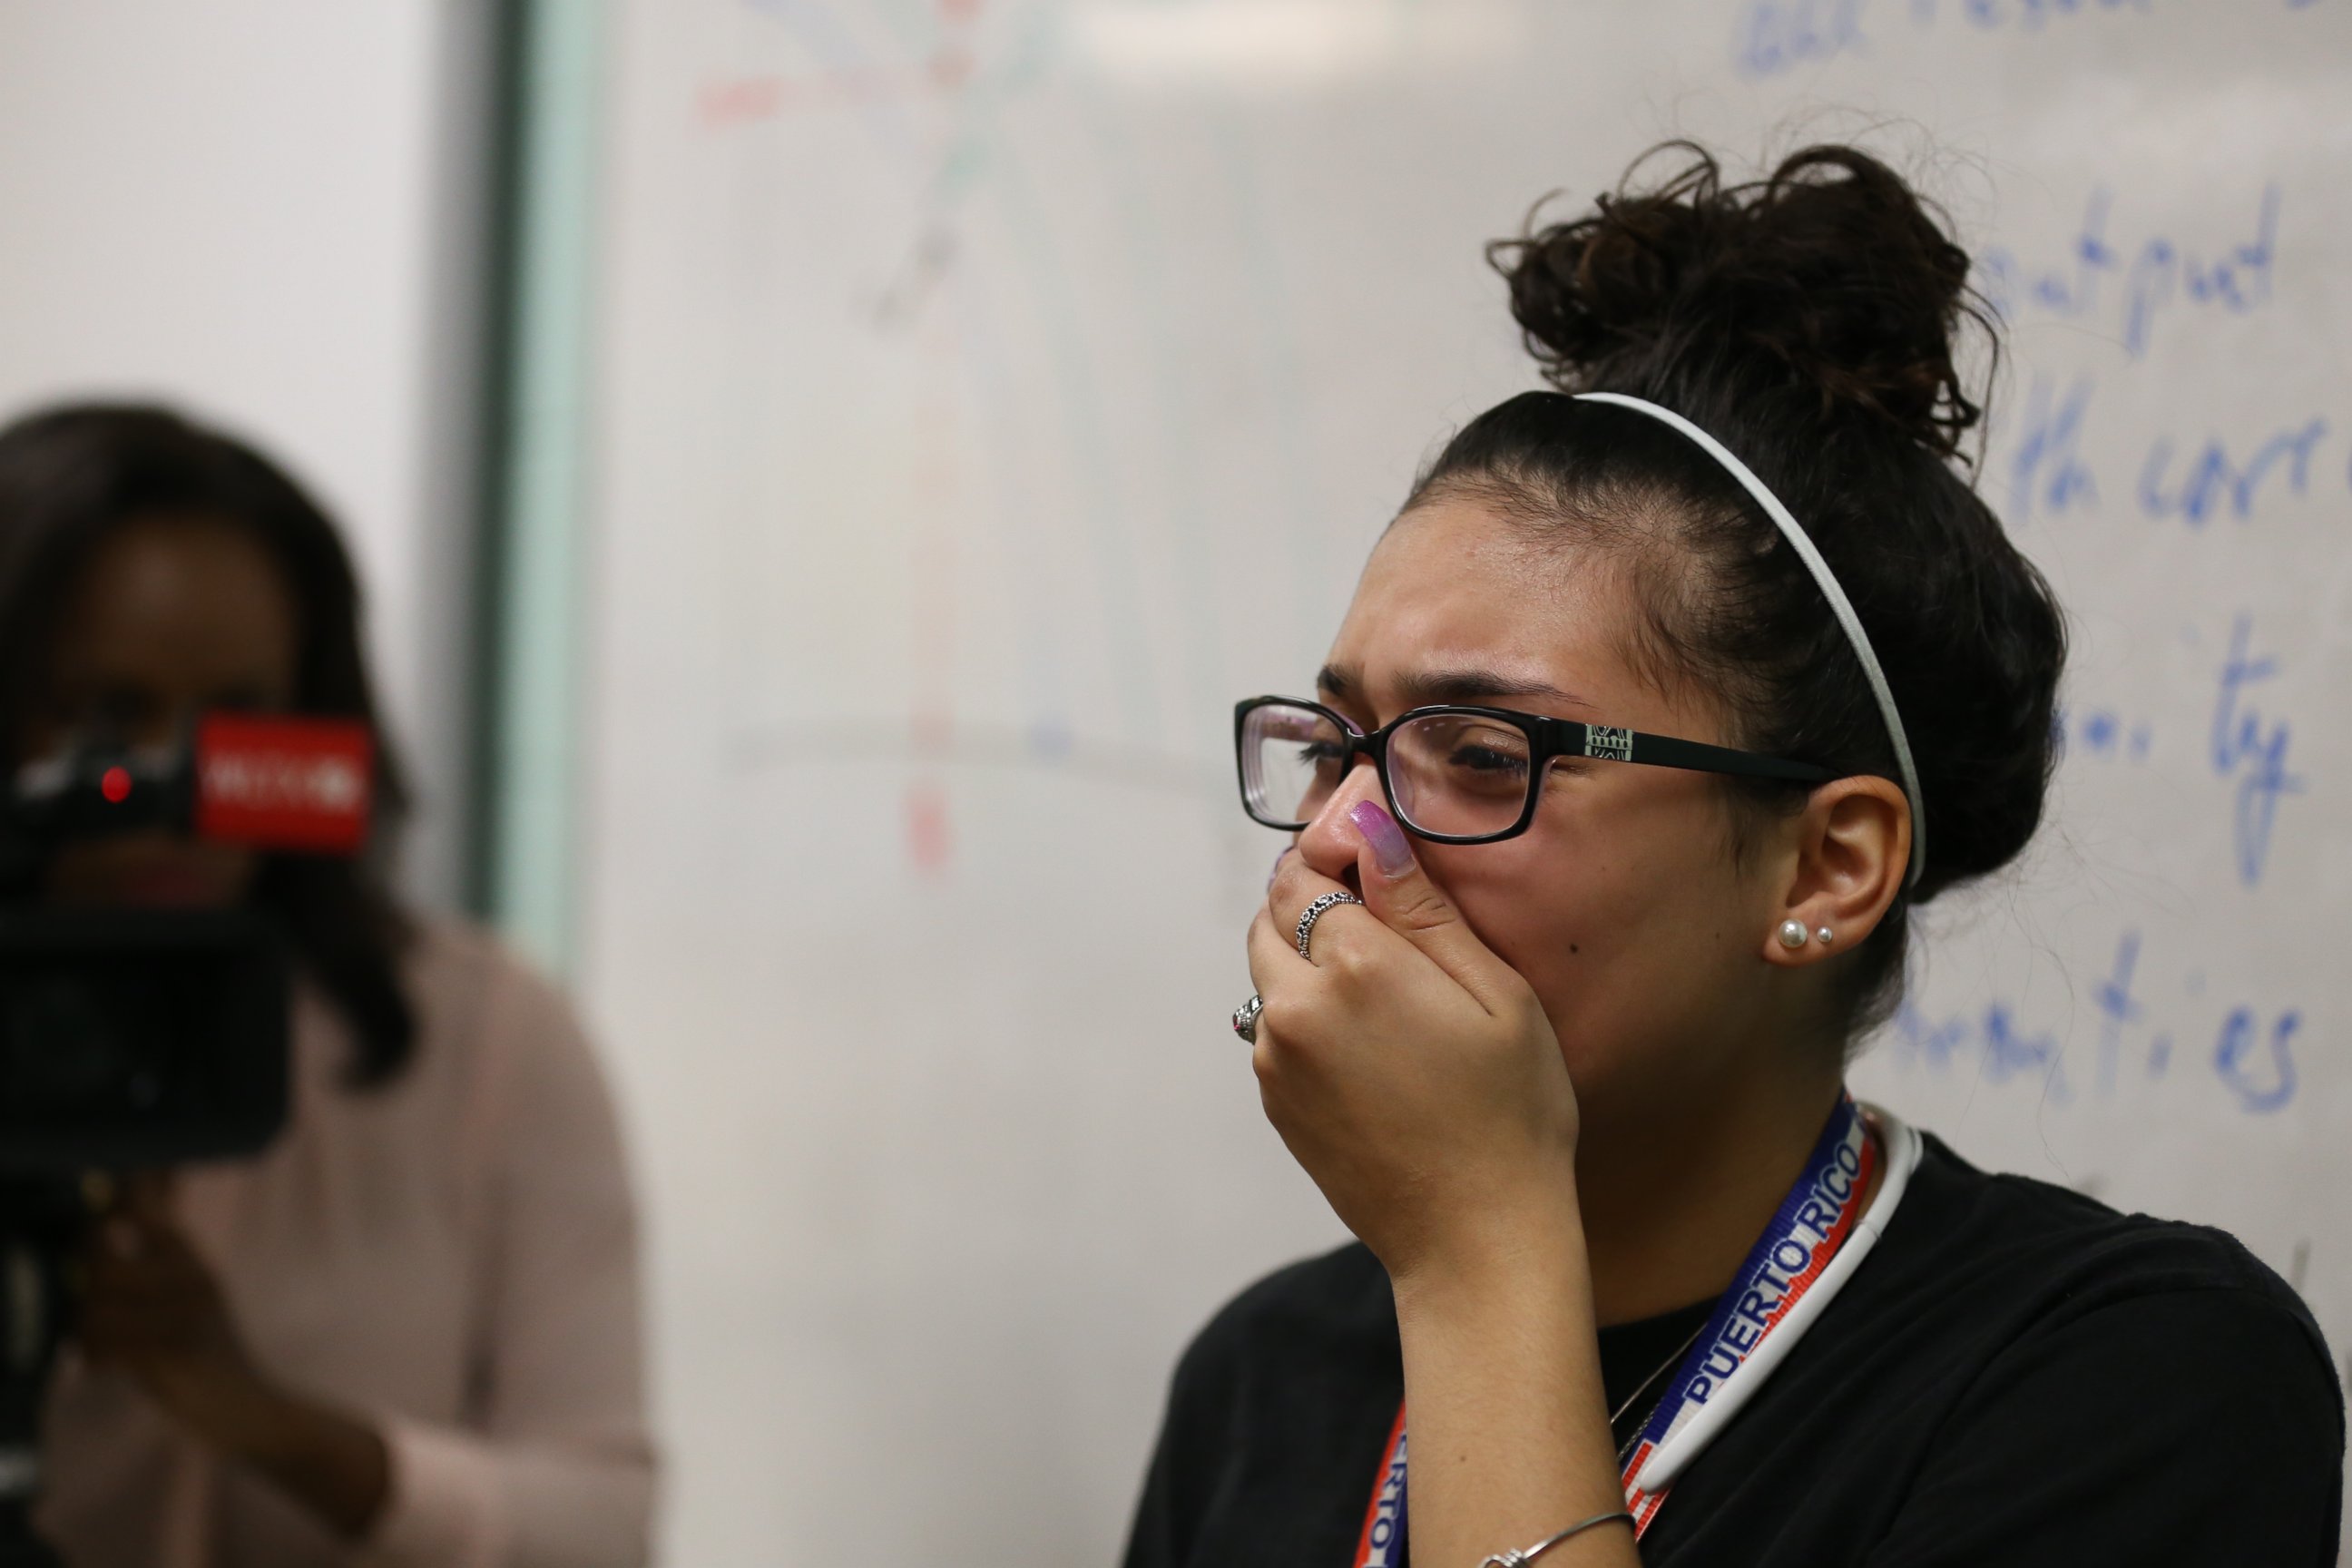 PHOTO: South Carolina Student Surprised at School With Return of Her Dad From Kuwait